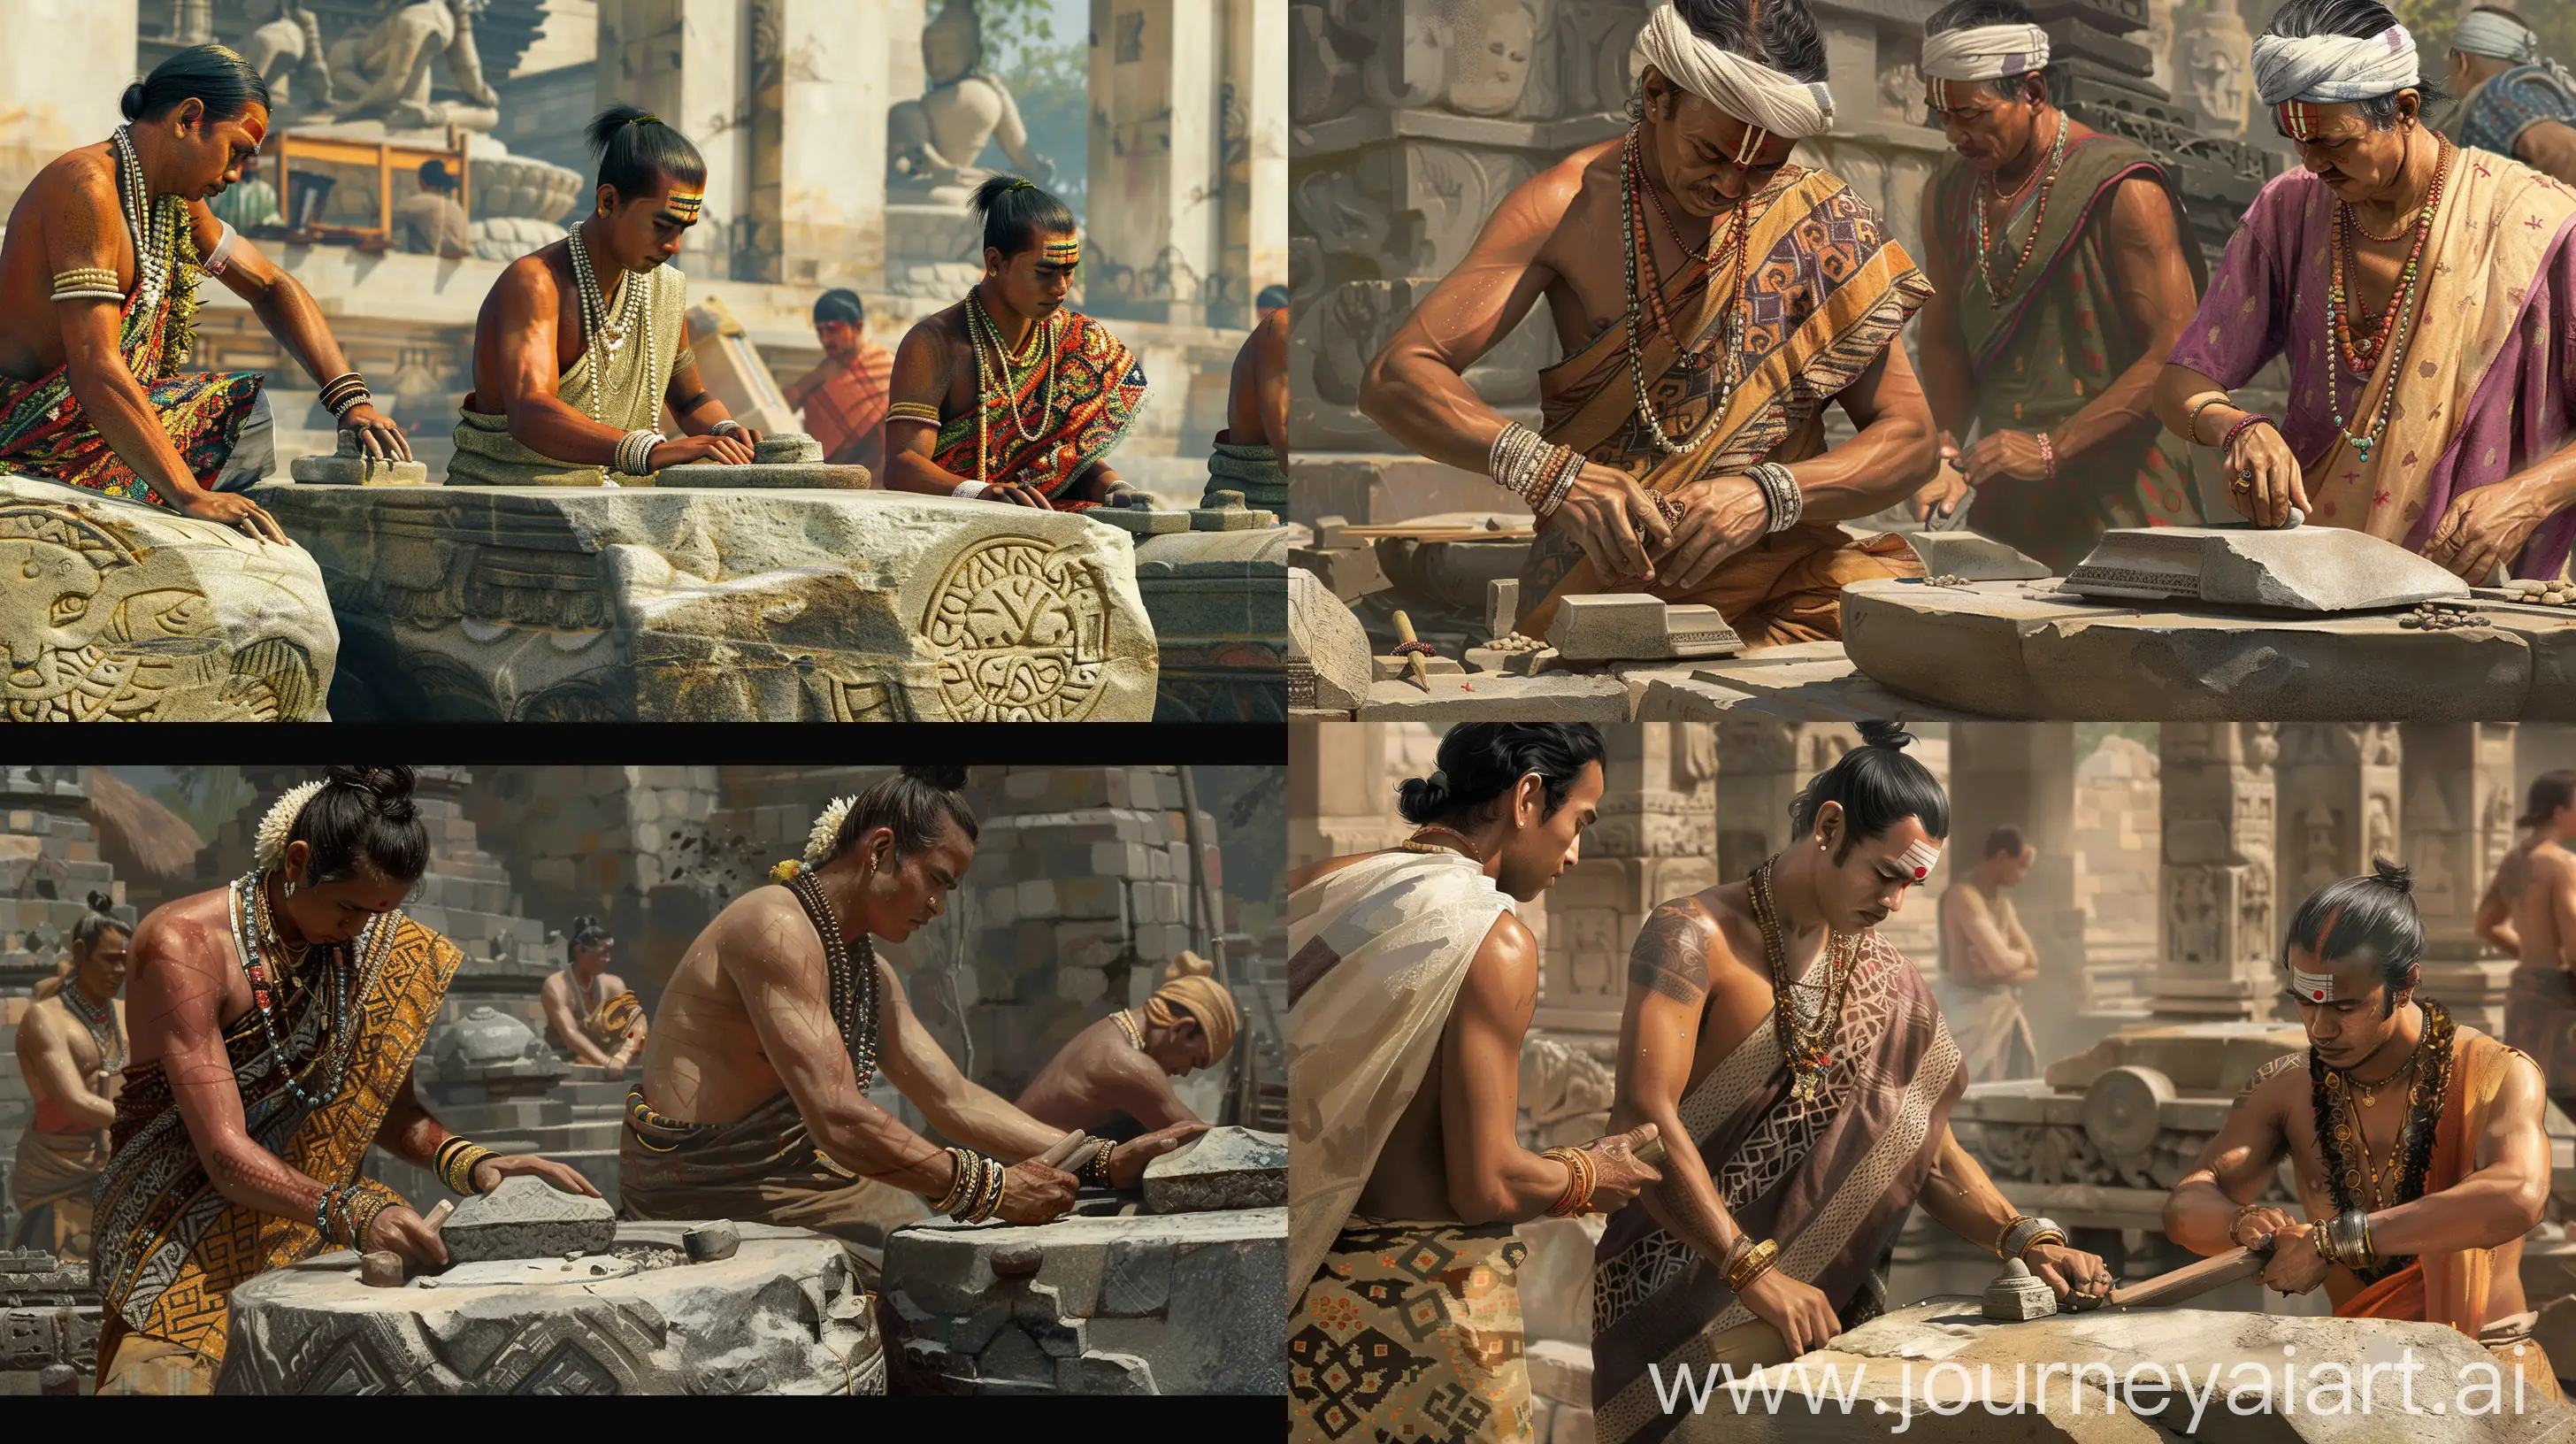 Construction-of-Borobudur-Temple-Central-Java-Workers-in-Traditional-Hindu-Clothing-Carving-Andesite-Stones